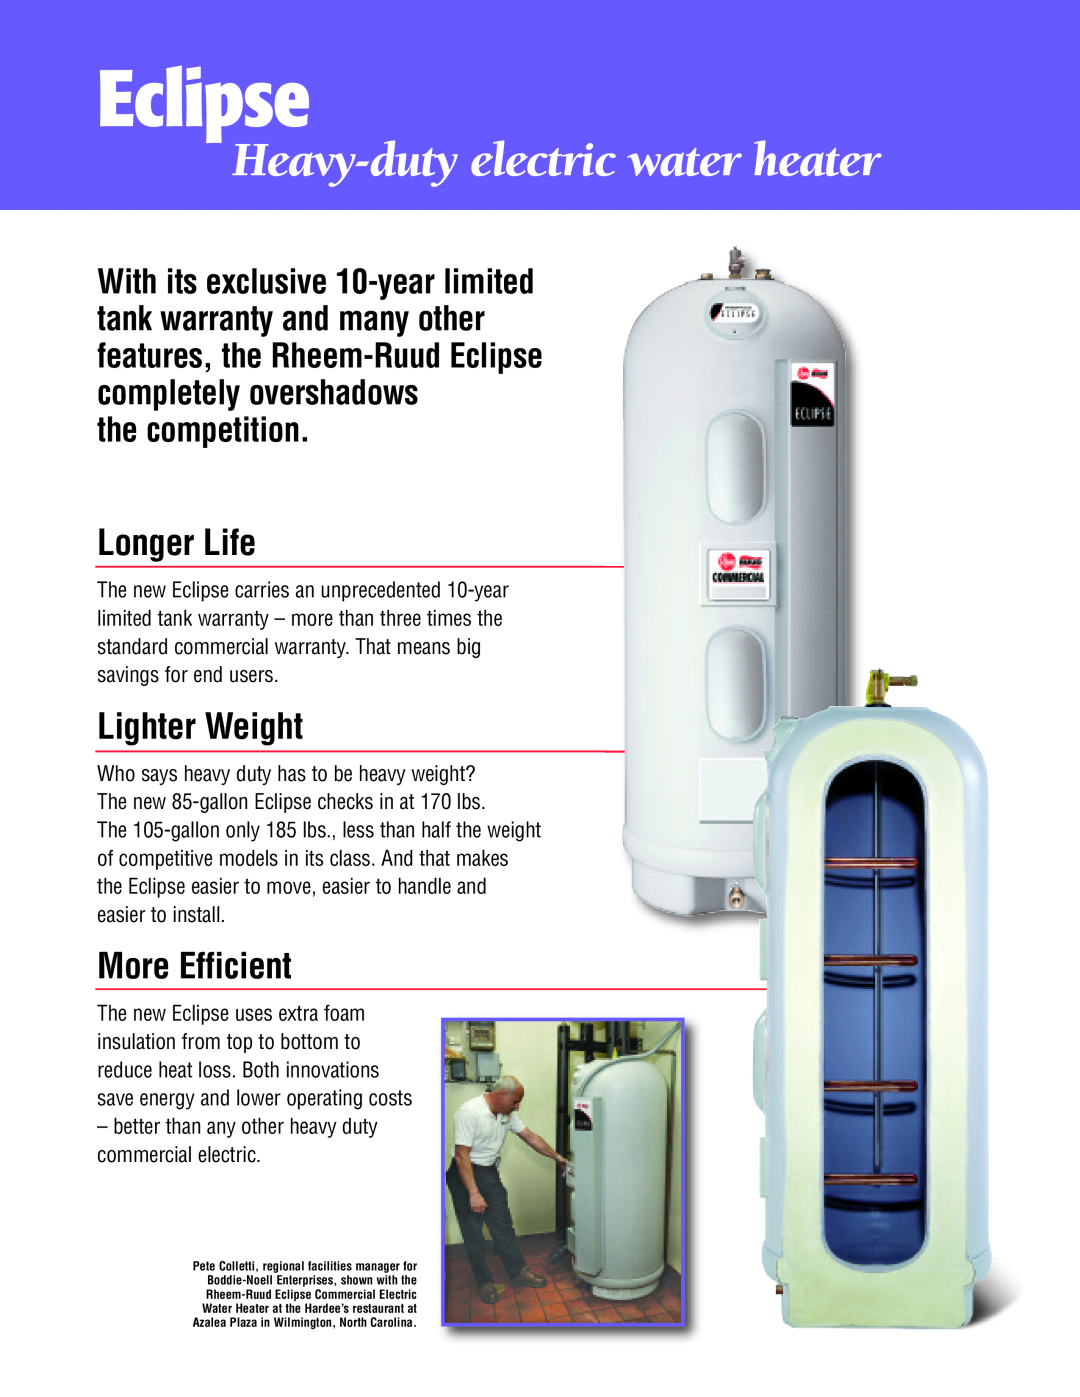 Rheem 90F, 60F, 70F Eclipse, Heavy-duty electric water heater, Longer Life, Lighter Weight, More Efficient, the competition 